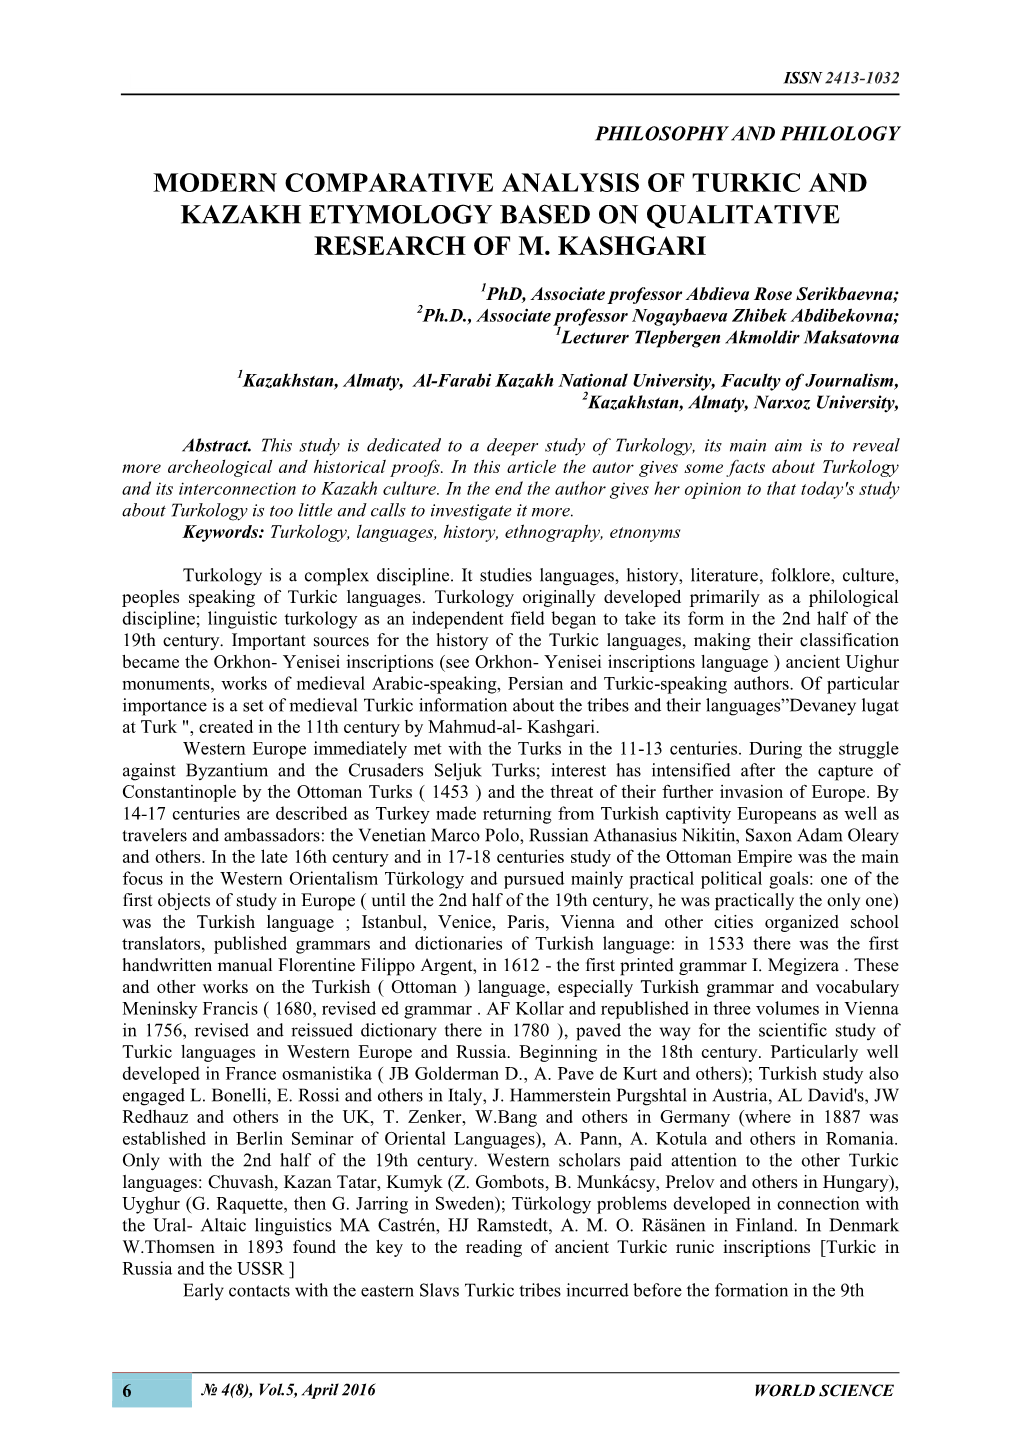 Modern Comparative Analysis of Turkic and Kazakh Etymology Based on Qualitative Research of M